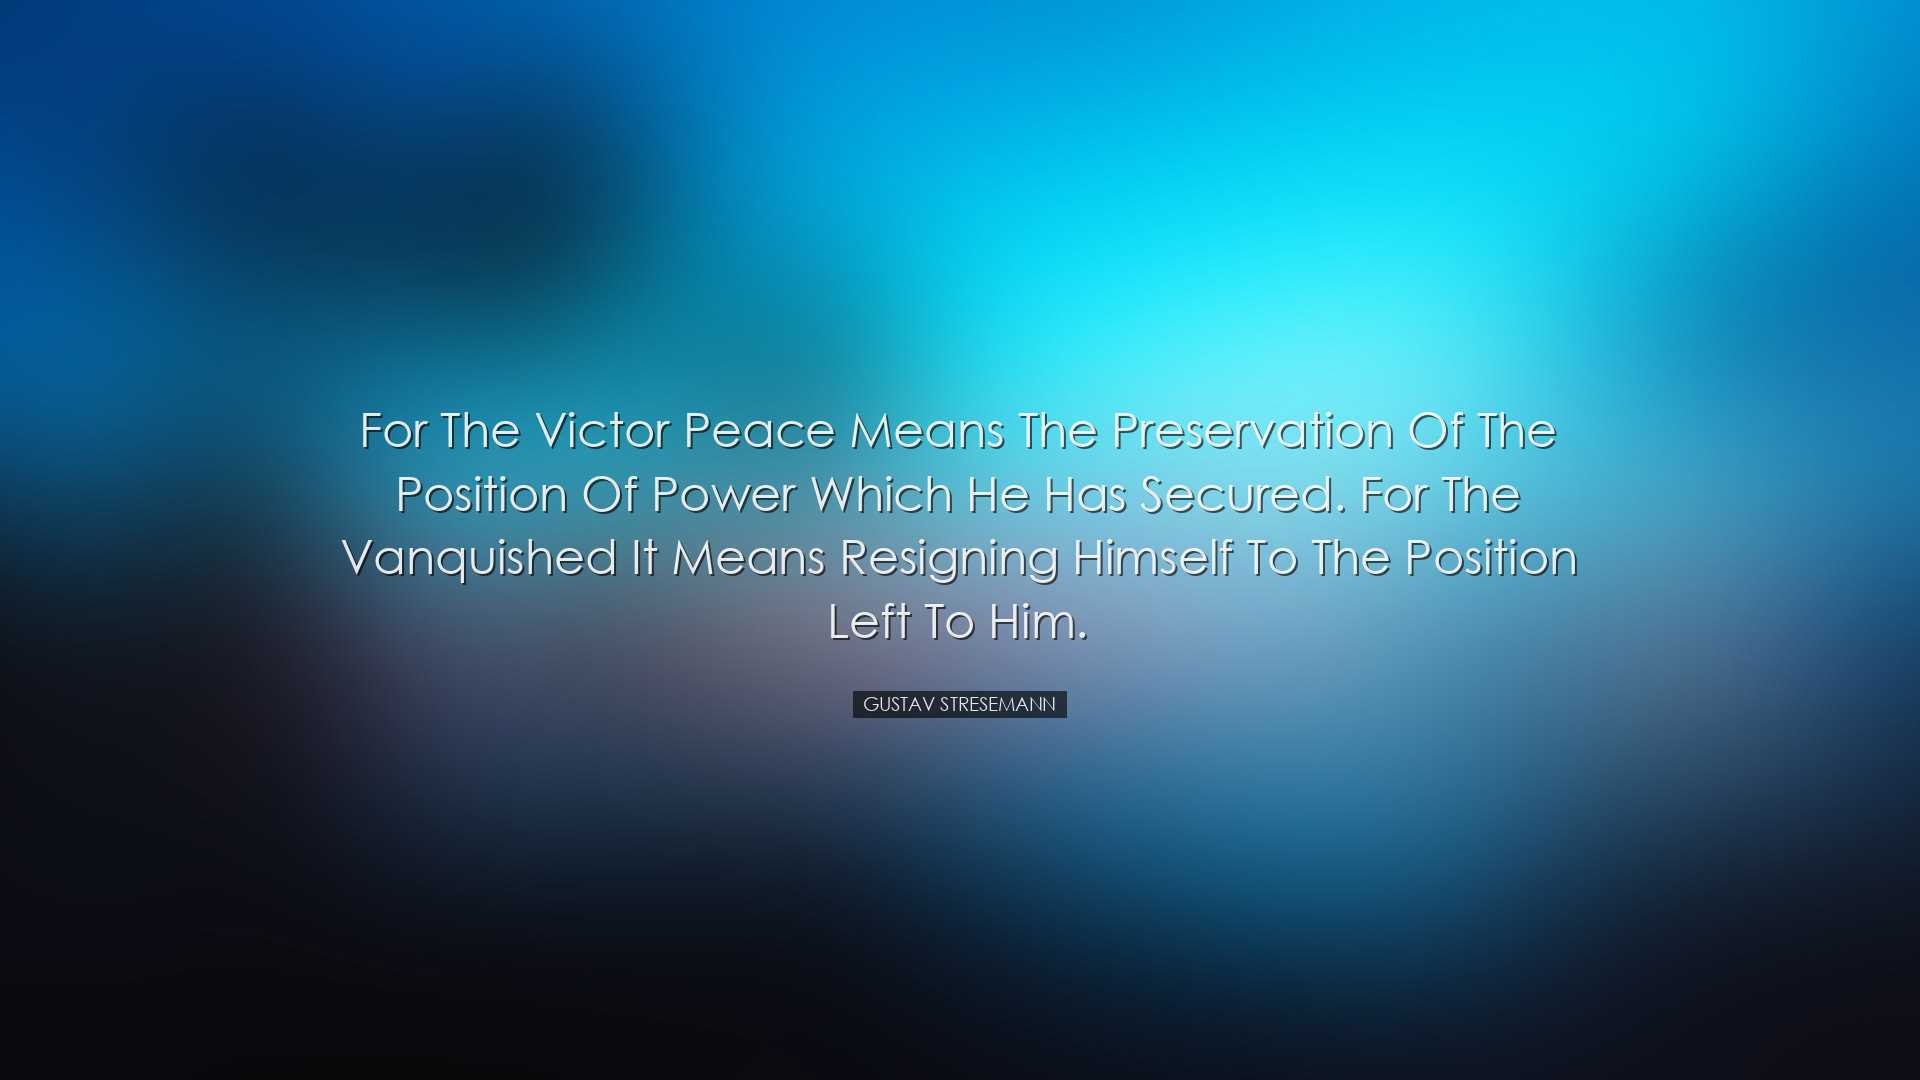 For the victor peace means the preservation of the position of pow